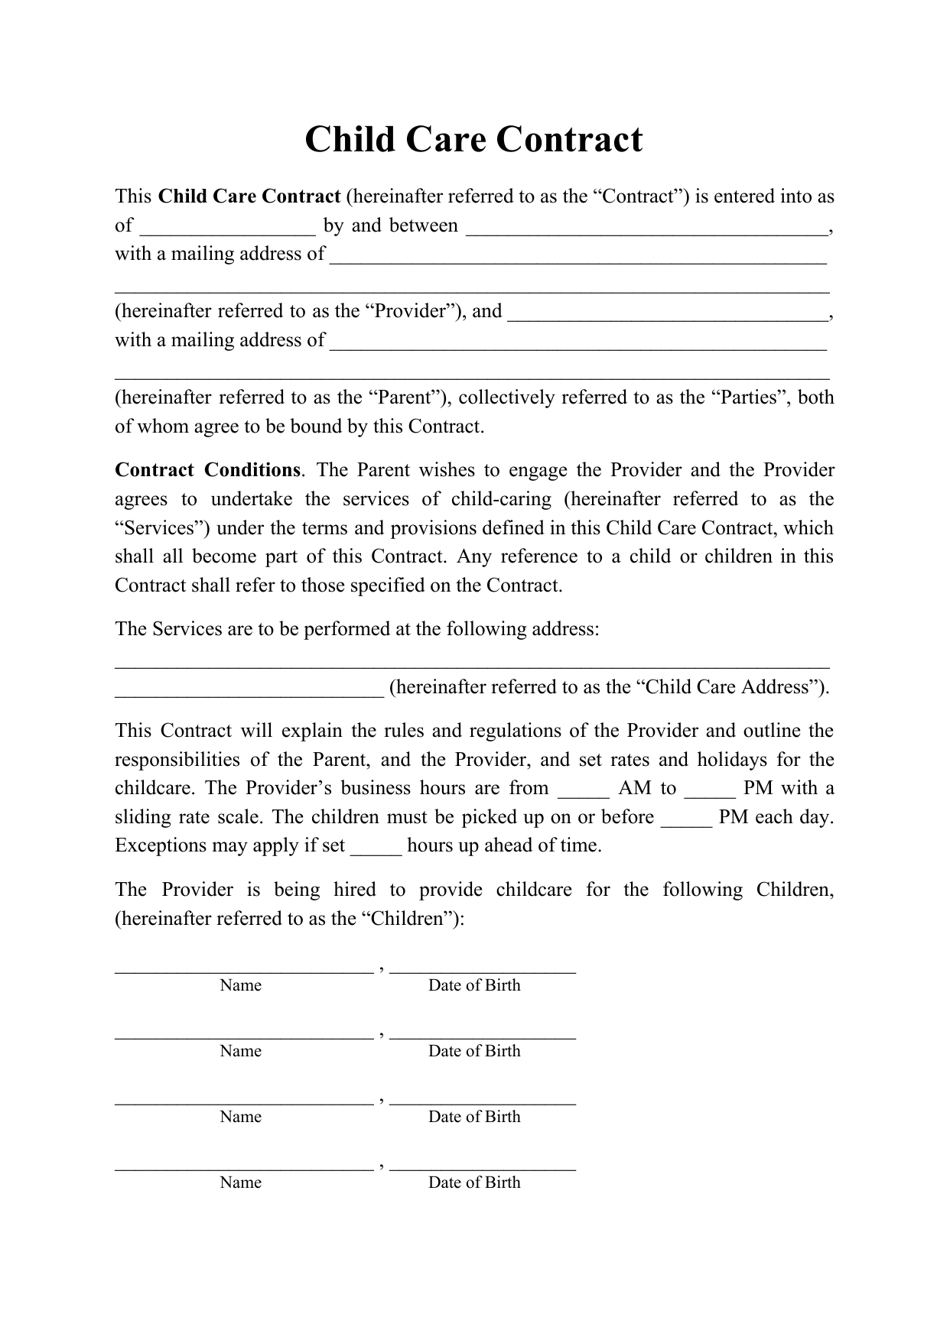 Child Care Contract Template, Page 1